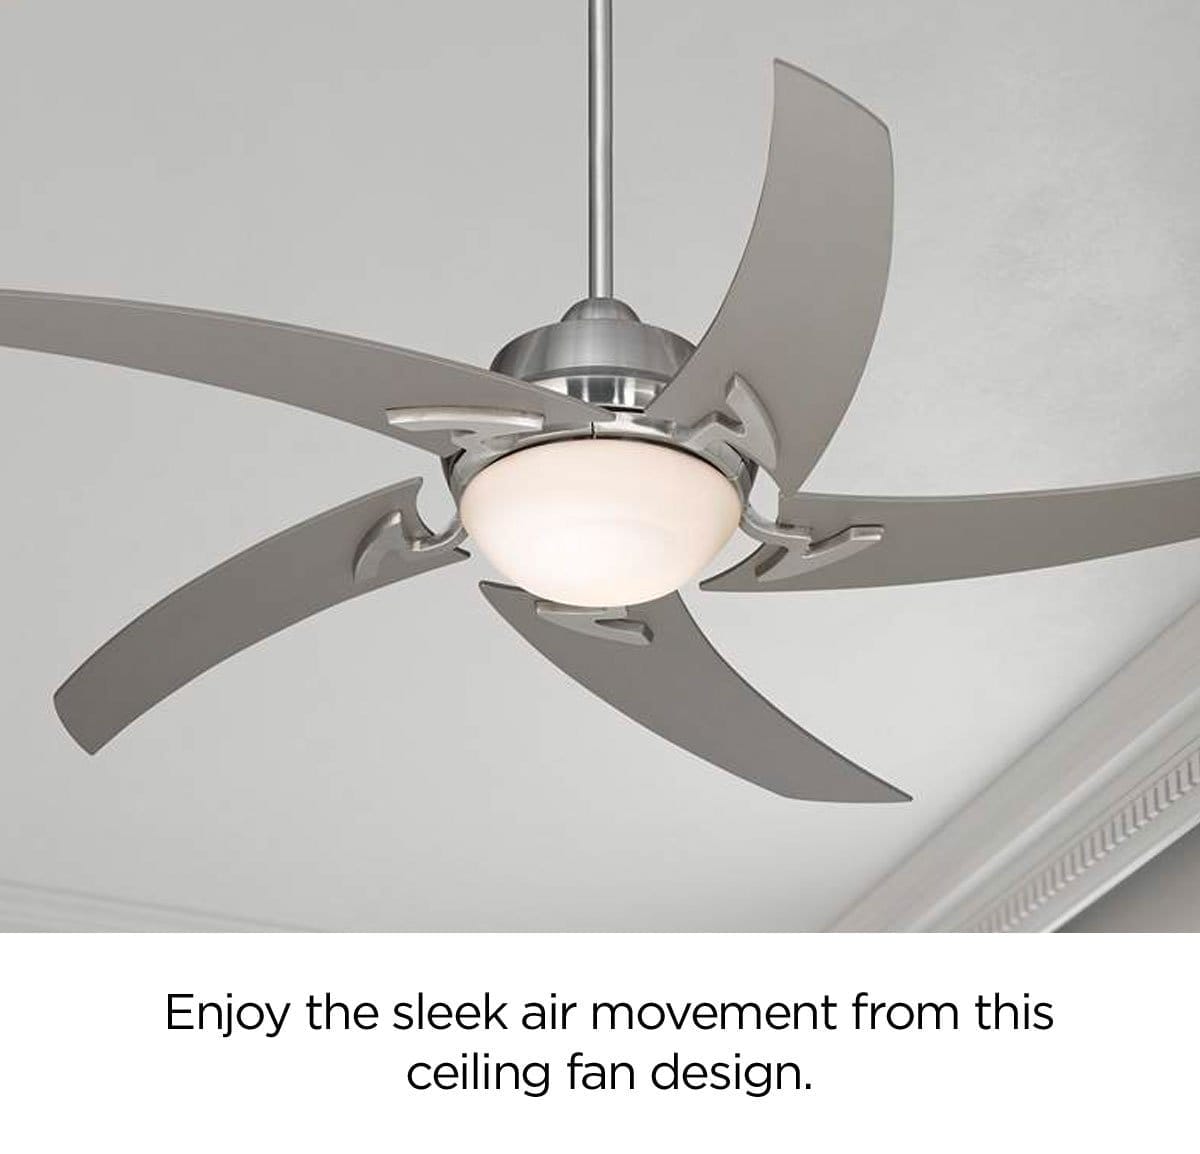 Enjoy the sleek air movement from this ceiling fan design.